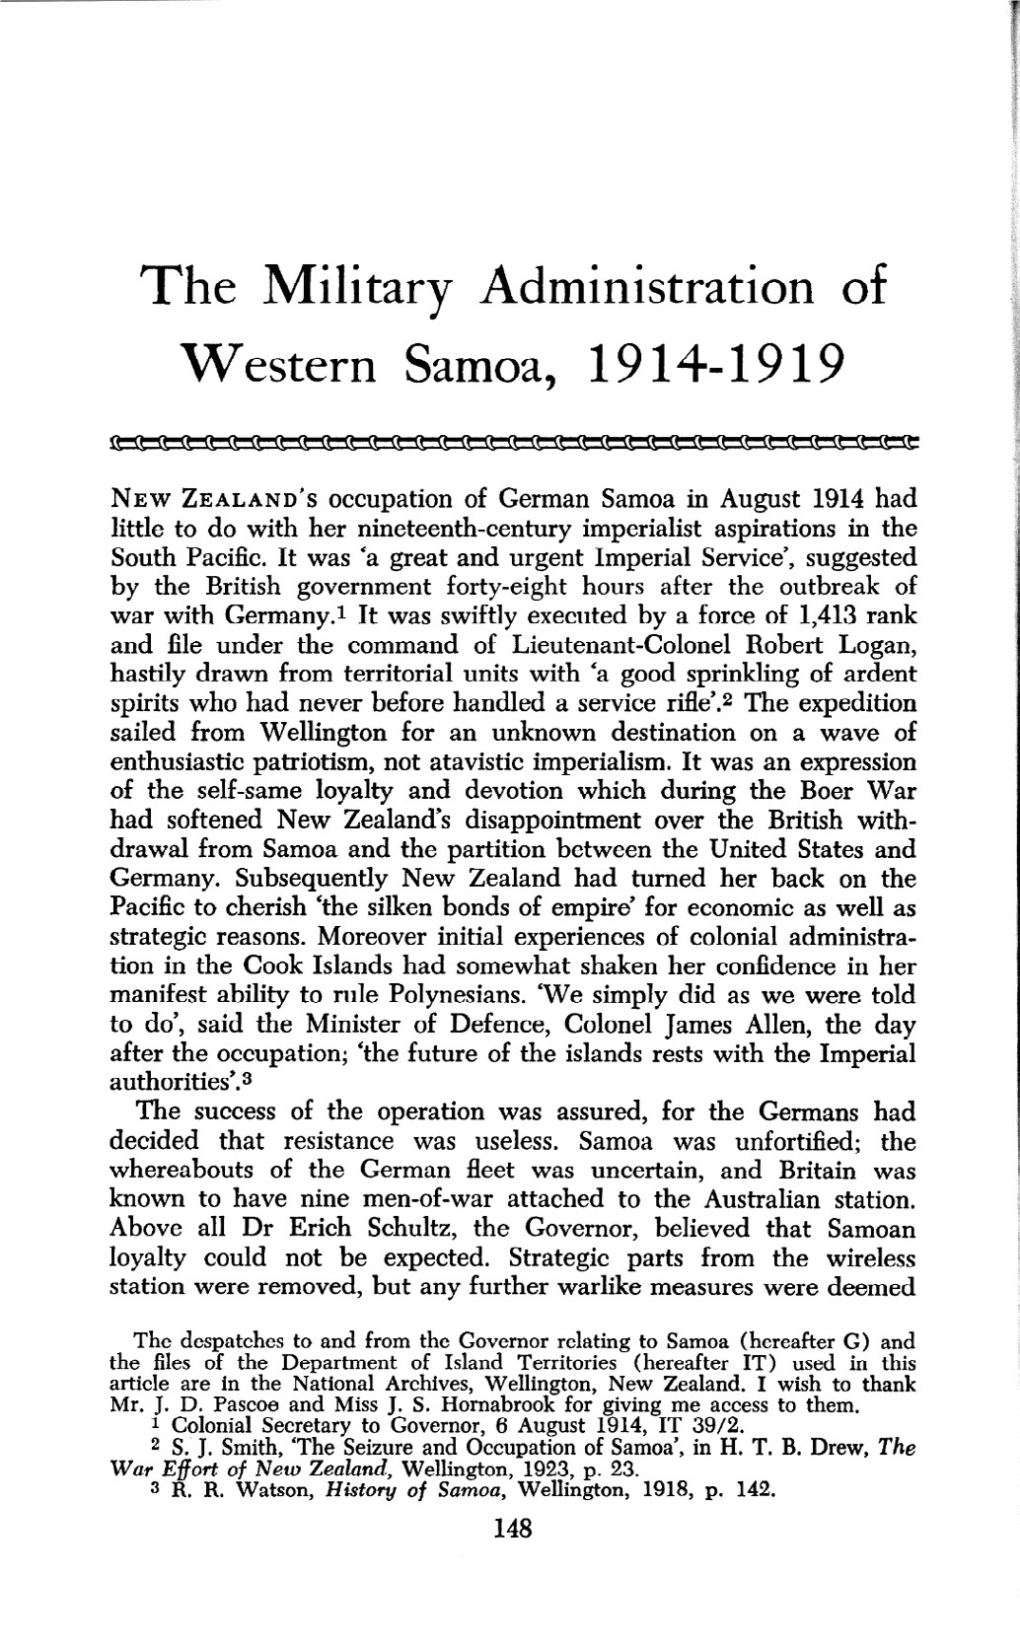 The Military Administration of Western Samoa, 1914-1919, by Mary Boyd